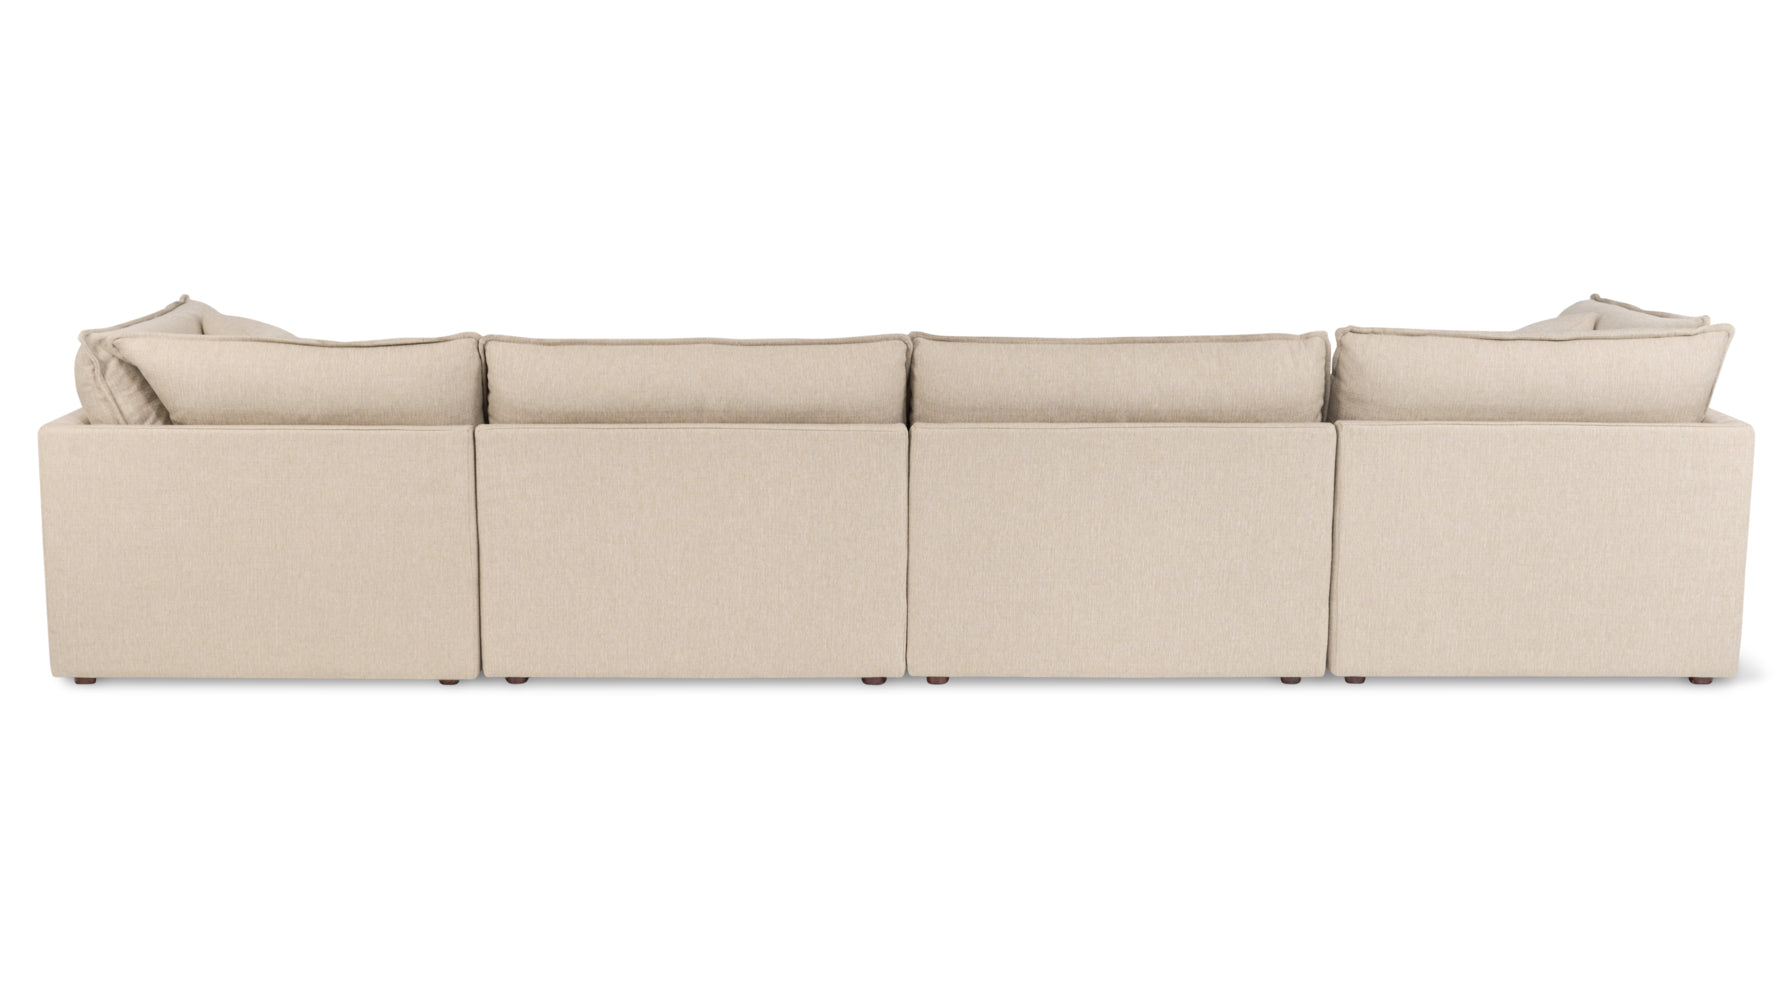 Chill Time 6-Piece Modular U-Shaped Sectional, Biscuit - Image 5